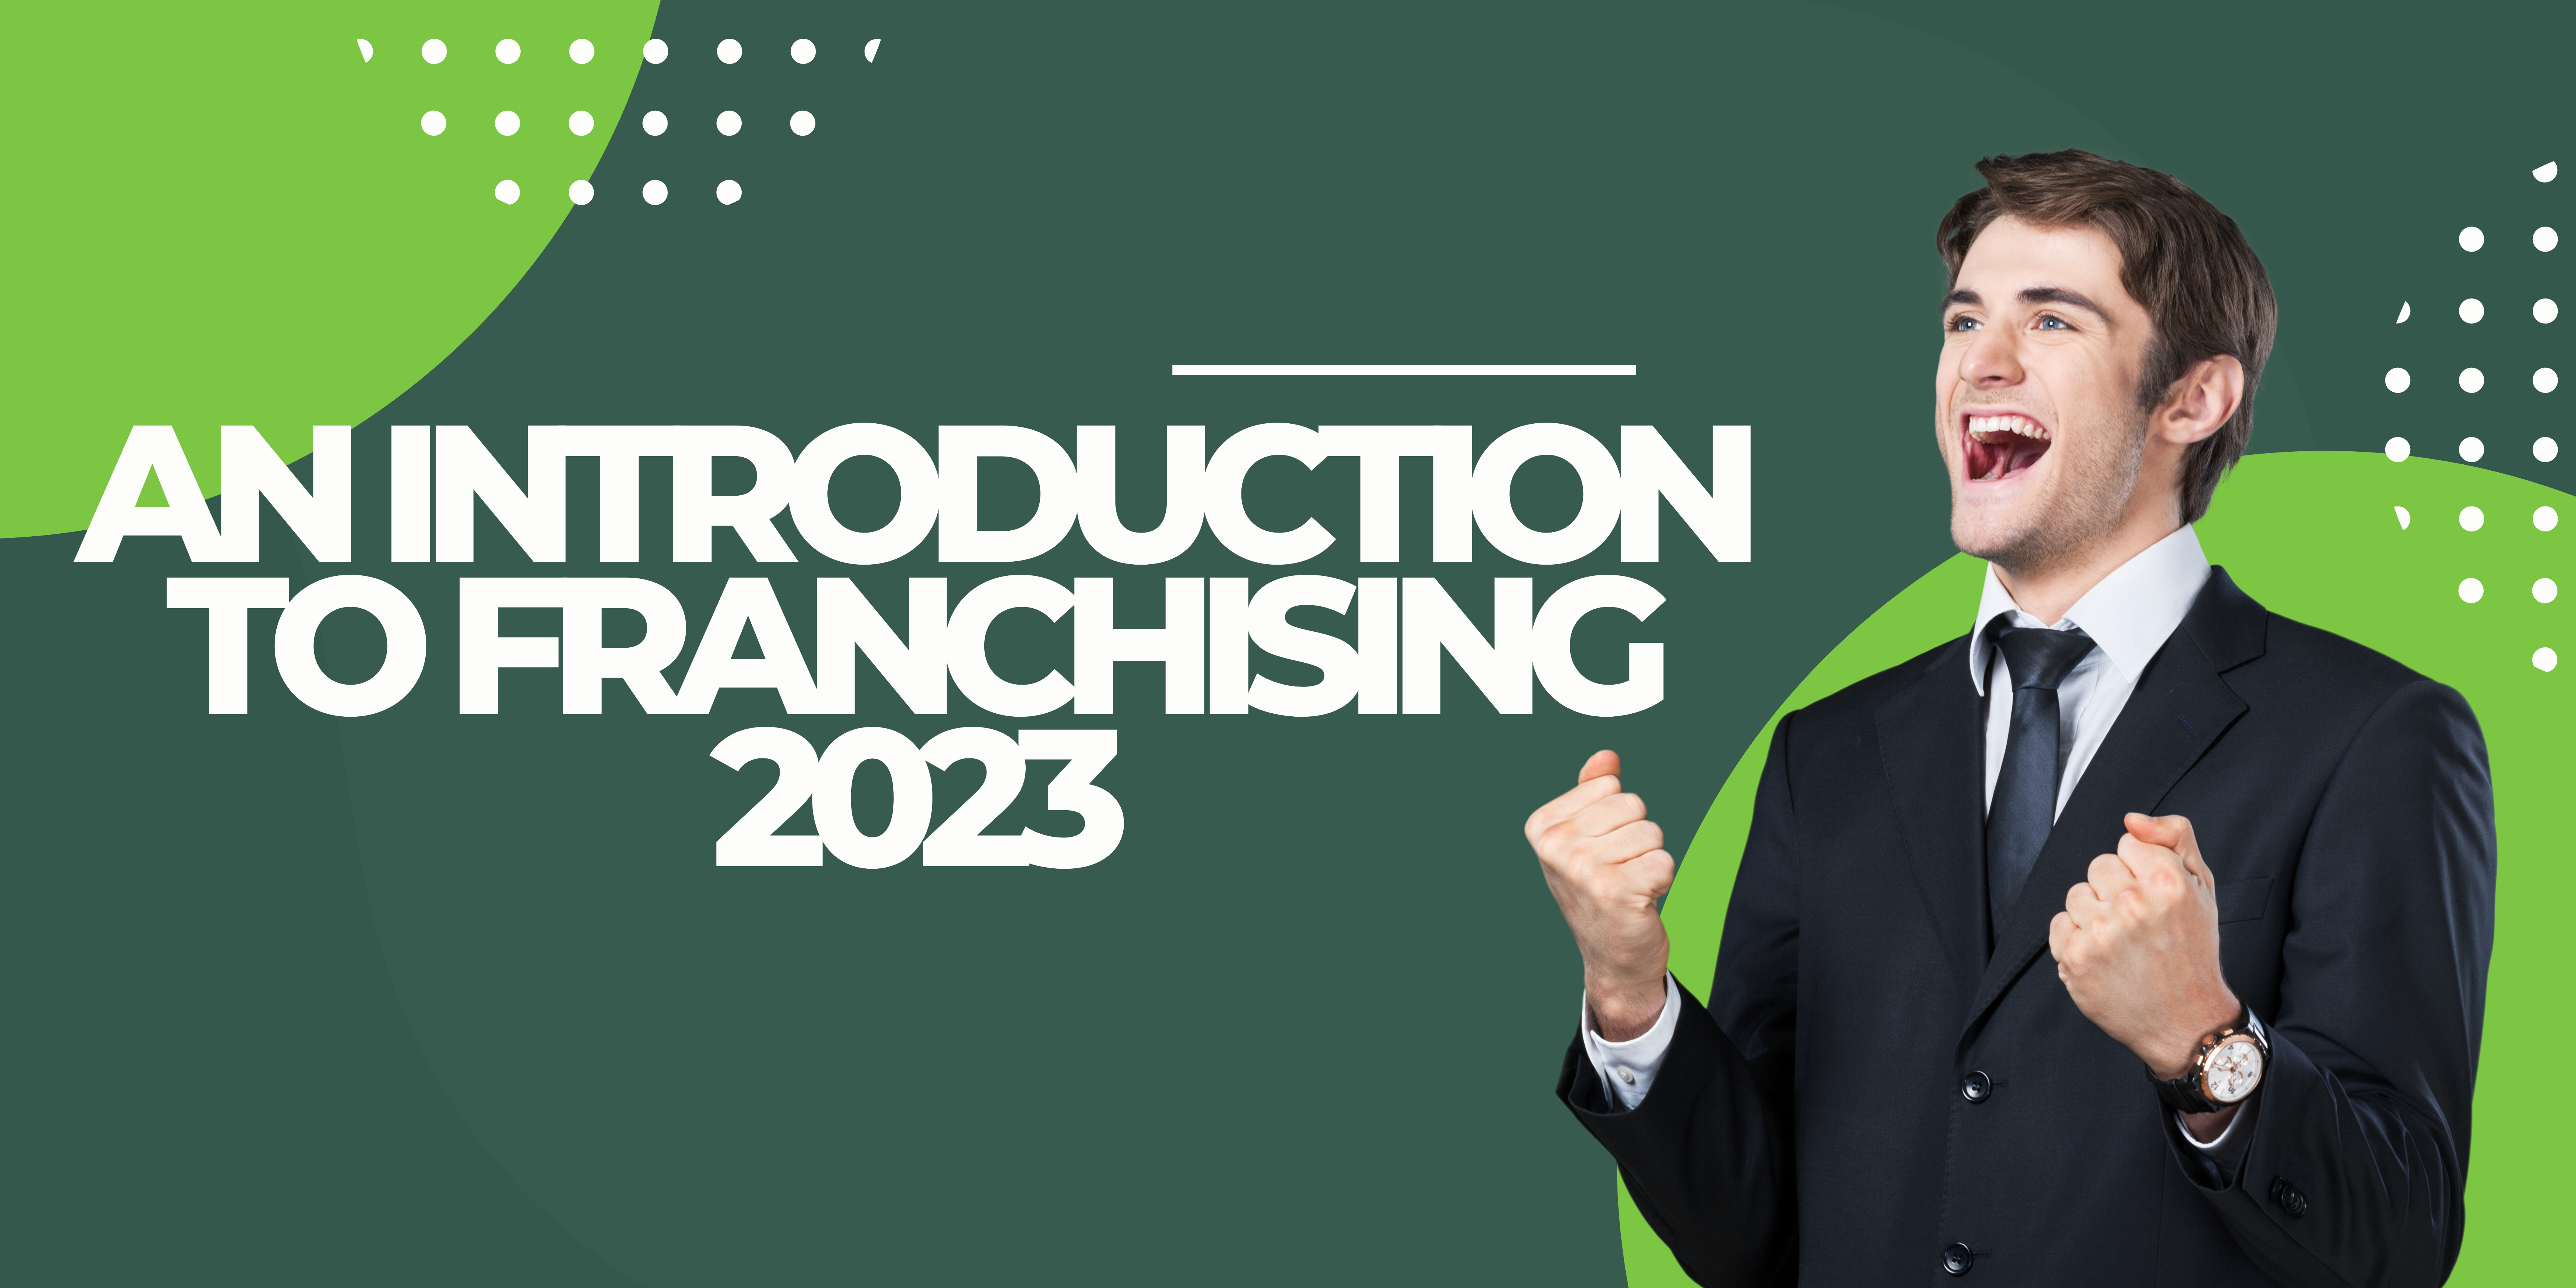 An Introduction to Franchising 2023 Header -diarynigracia